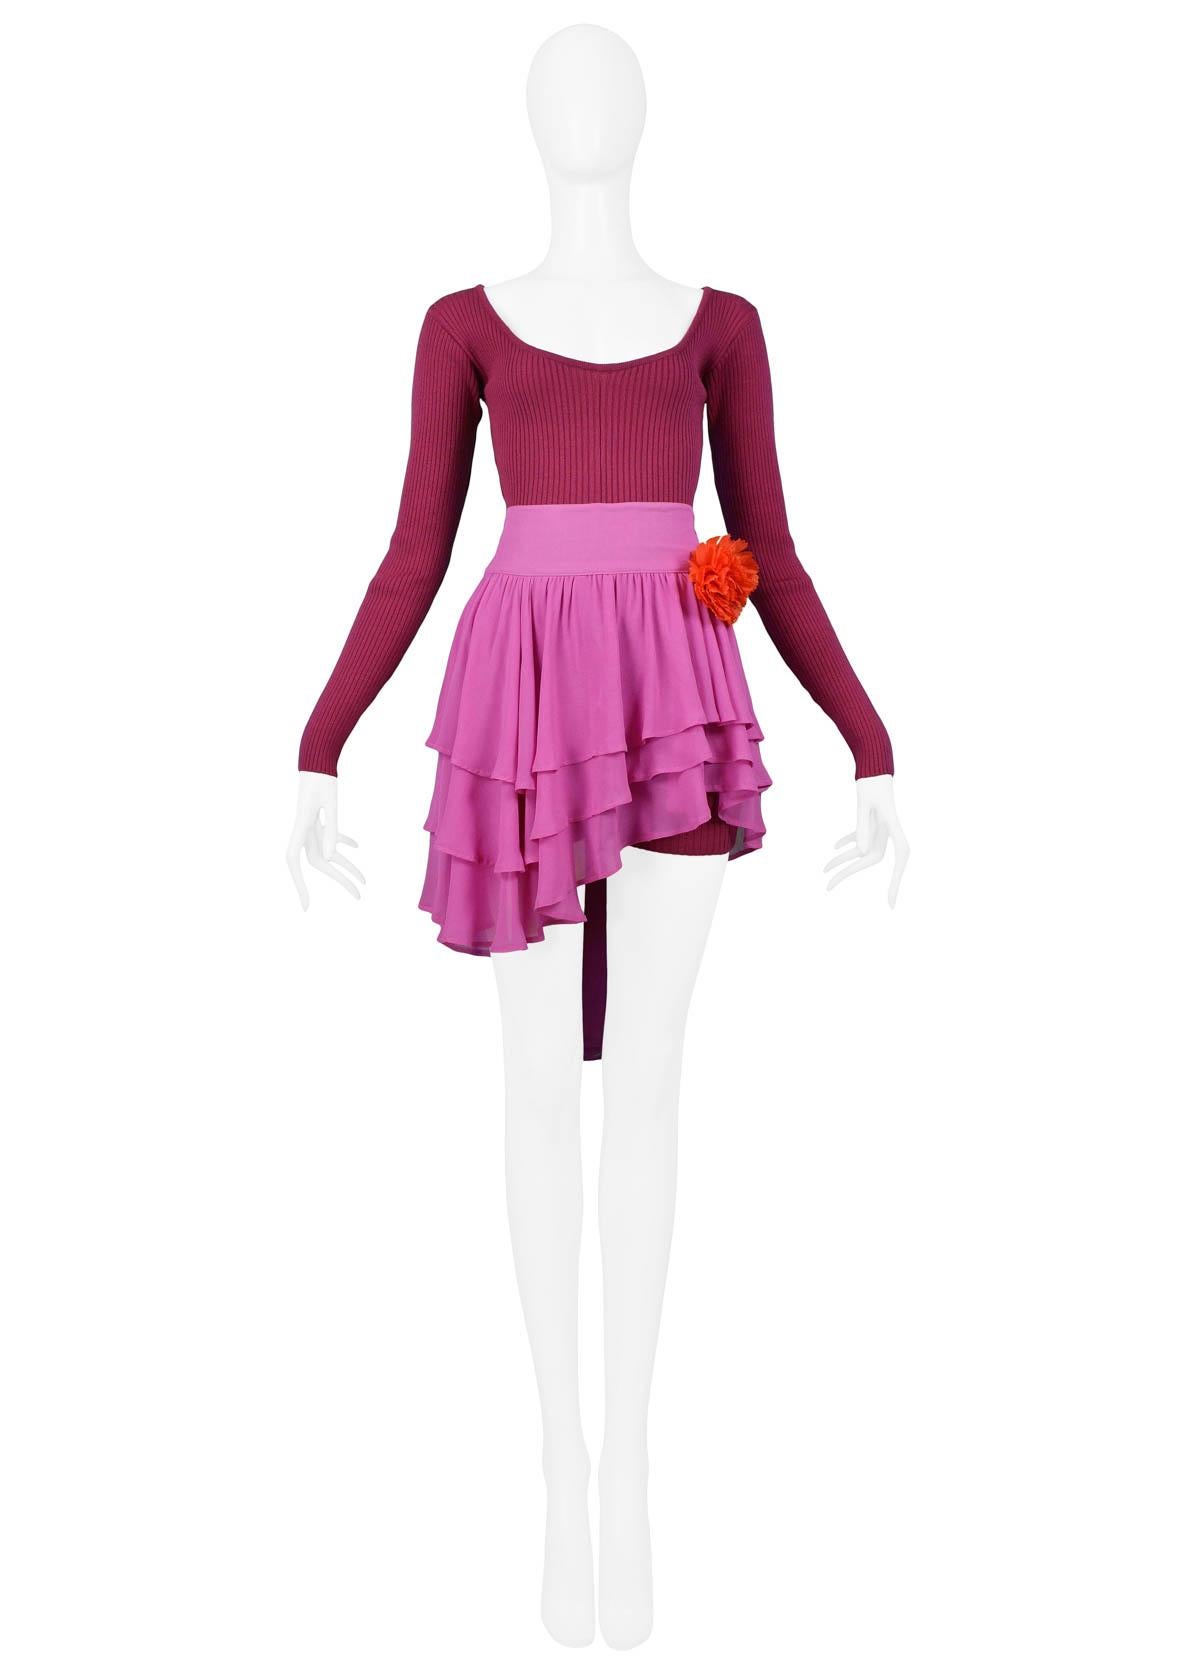 Vintage Complice pink chiffon skirt and magenta bodysuit shorts ensemble. The chiffon three-tier skirt features hook and eye closure at the side, an attached belt that ties into a bow, and attached flower. Rib-knit bodysuit features low cut